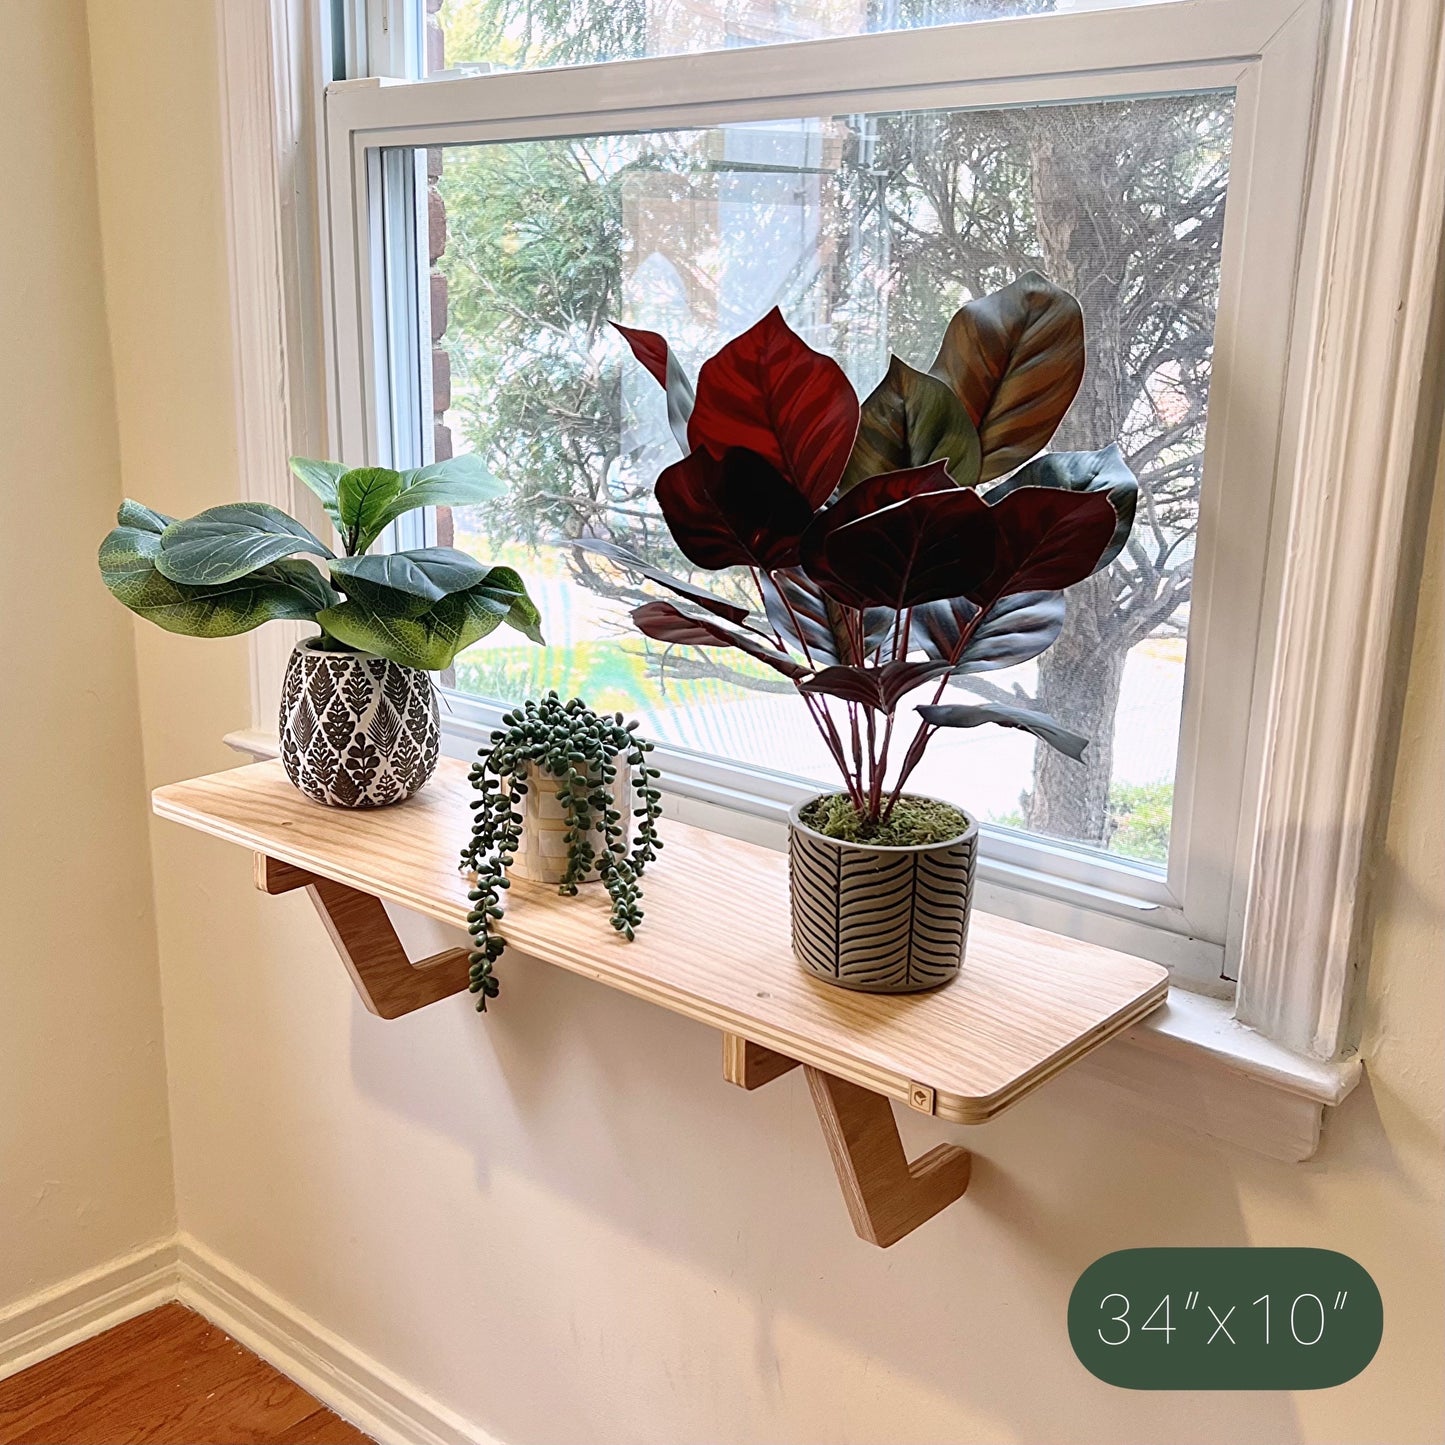 Shelves of various sizes_Oak Window Shelf_Sturdy-Safe support legs_Installed-removed 1 minute_No tools nails_Plant Shelf_Flower Herb Shelf